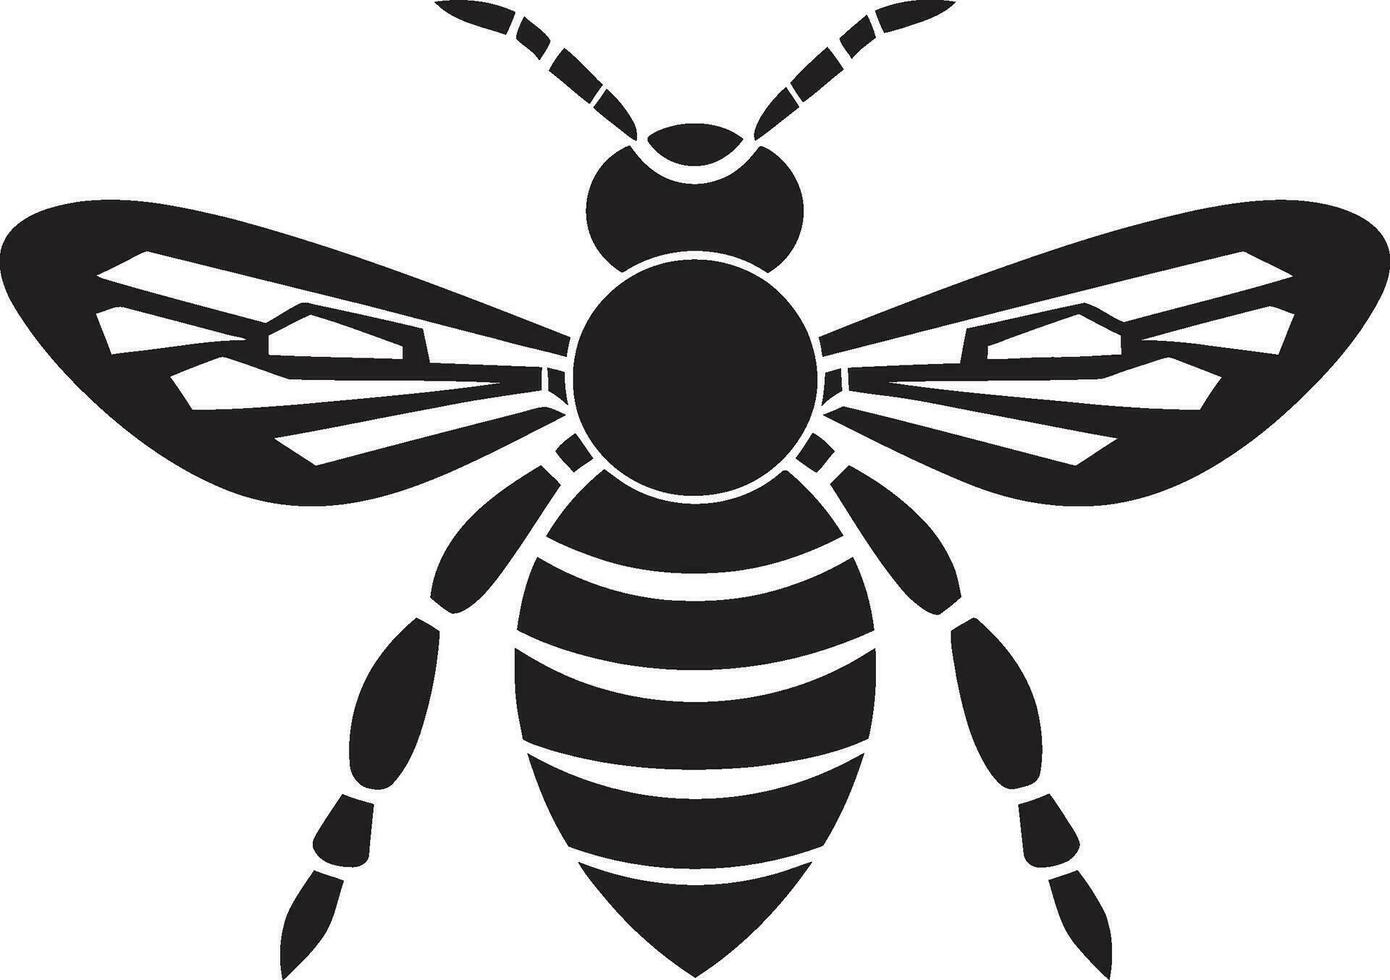 Bee Crowned Emblem Bee Sovereign Seal vector